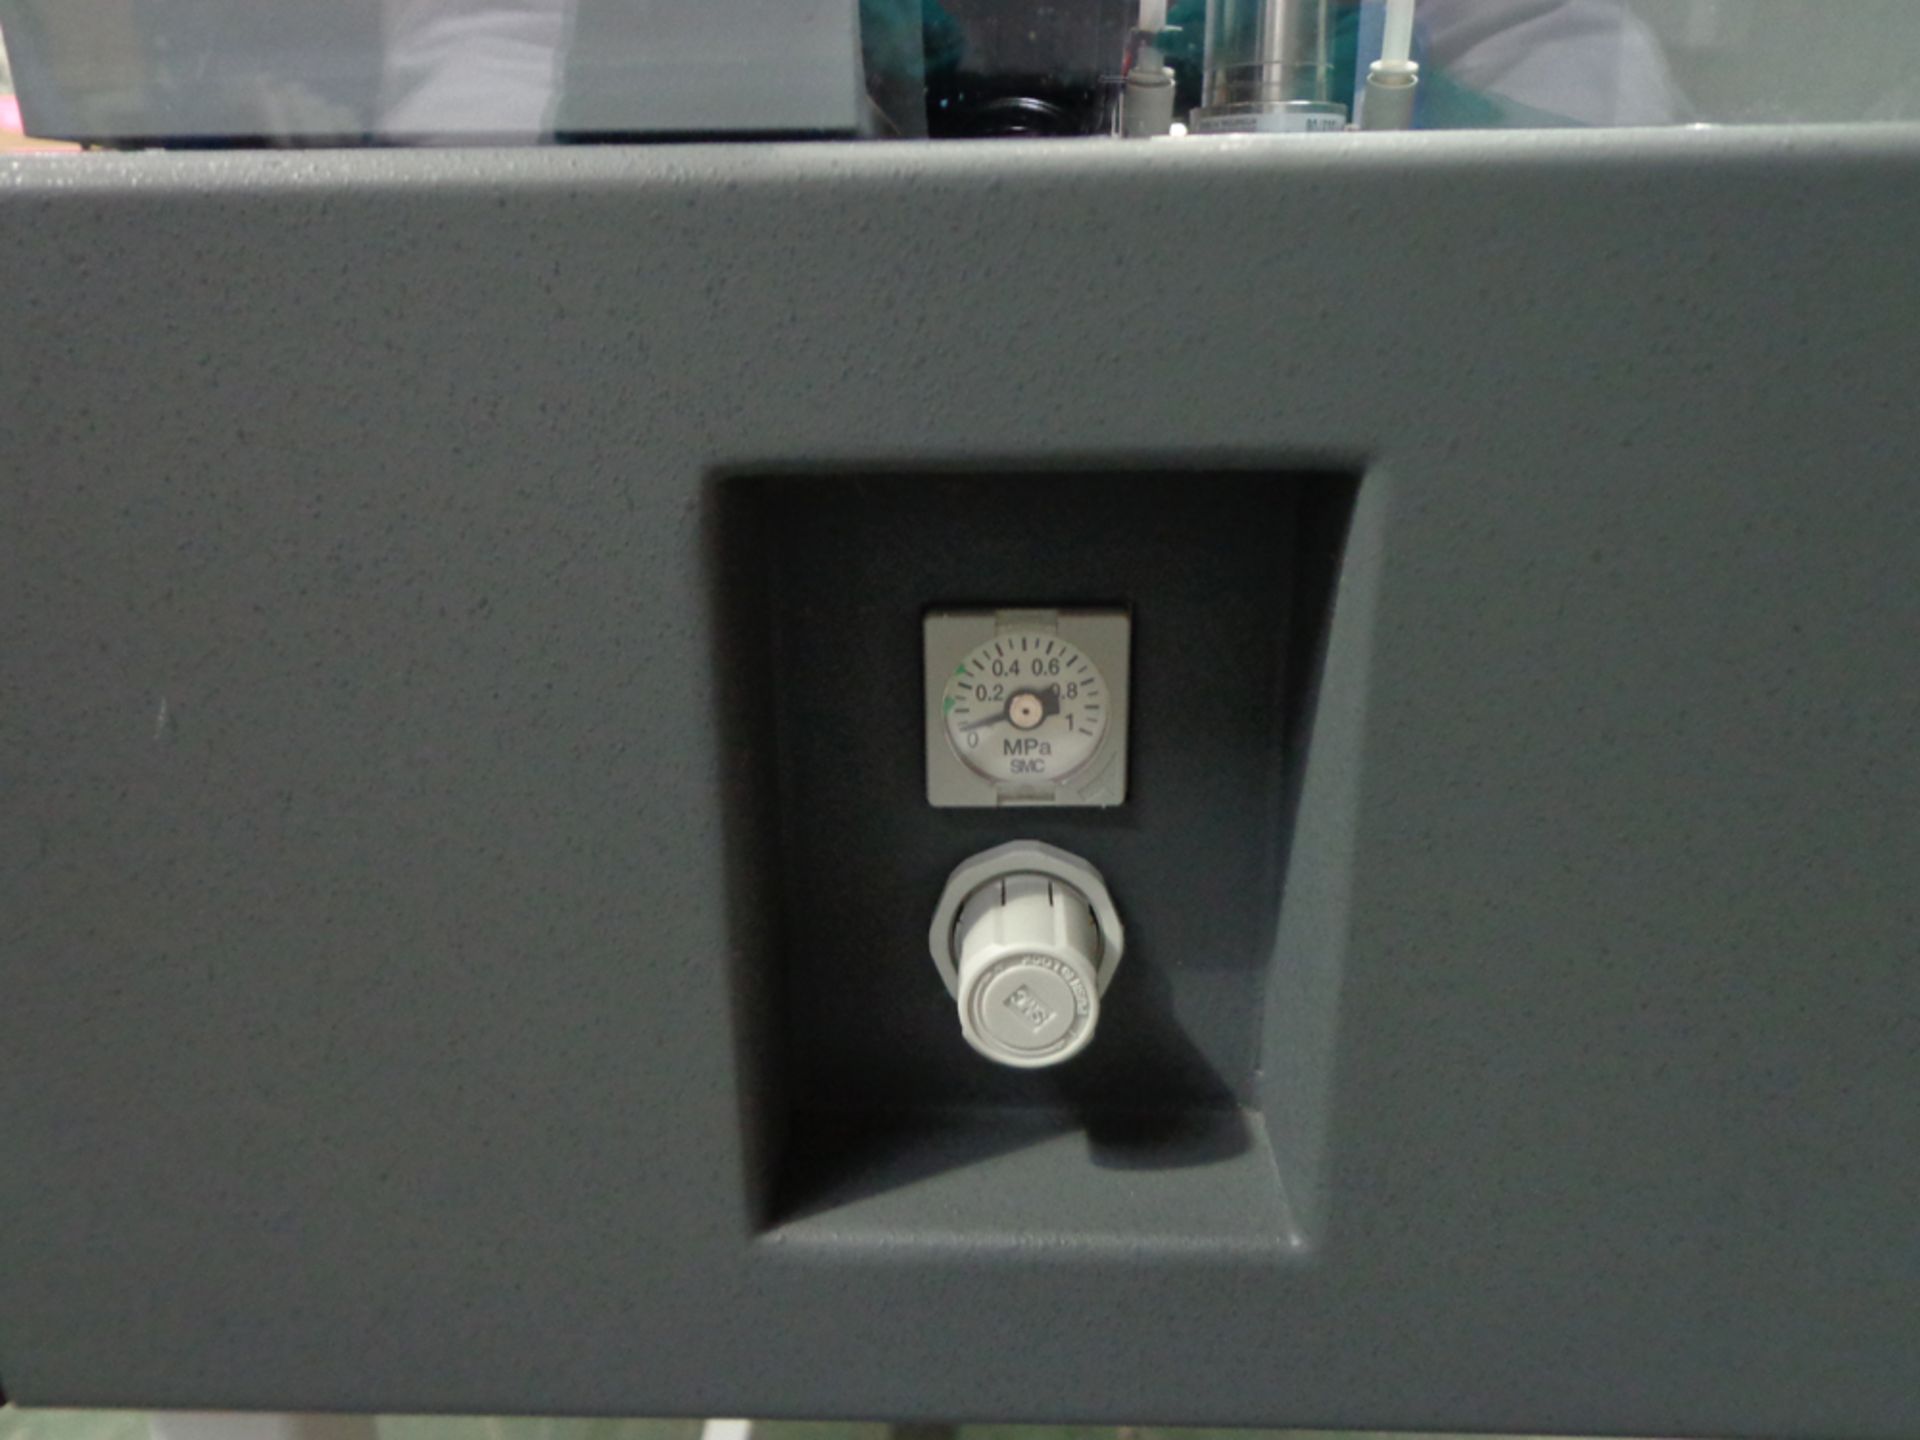 Covaris C-2000 Ultrasonic Automated Dissolution System. - Image 7 of 9